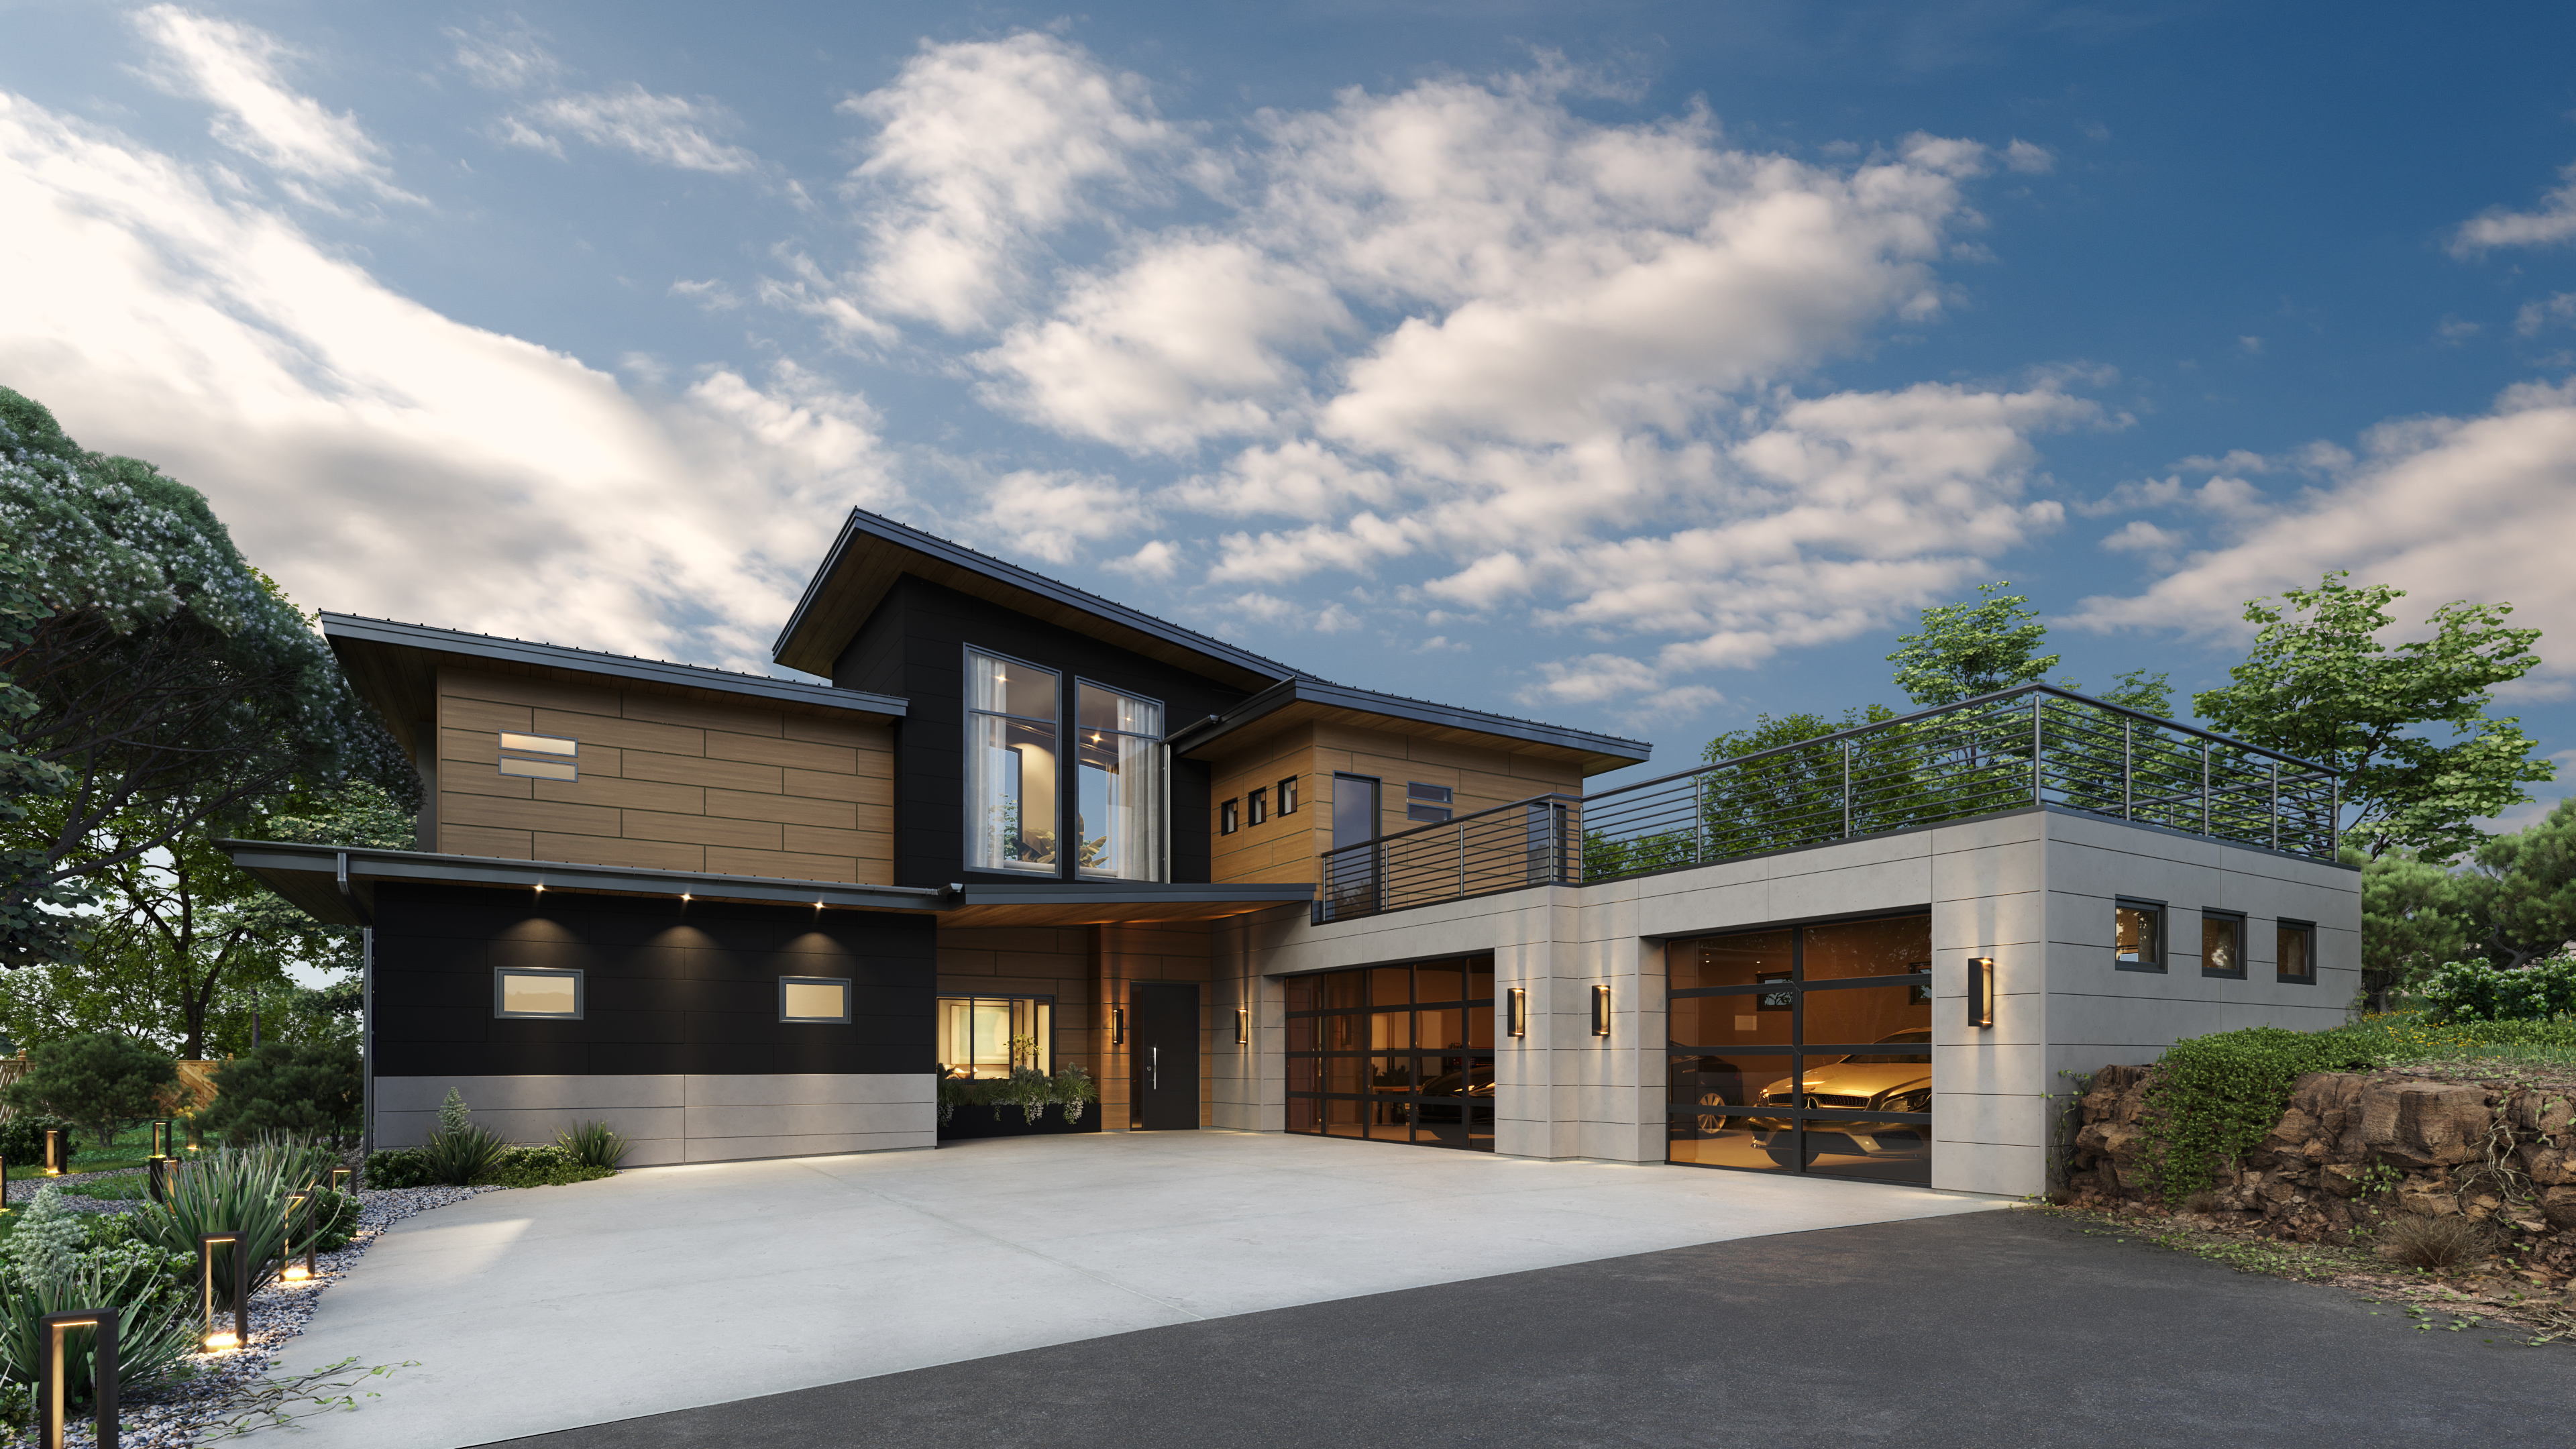 Street view of home with mixed siding textures, multiple car garages and modern design.